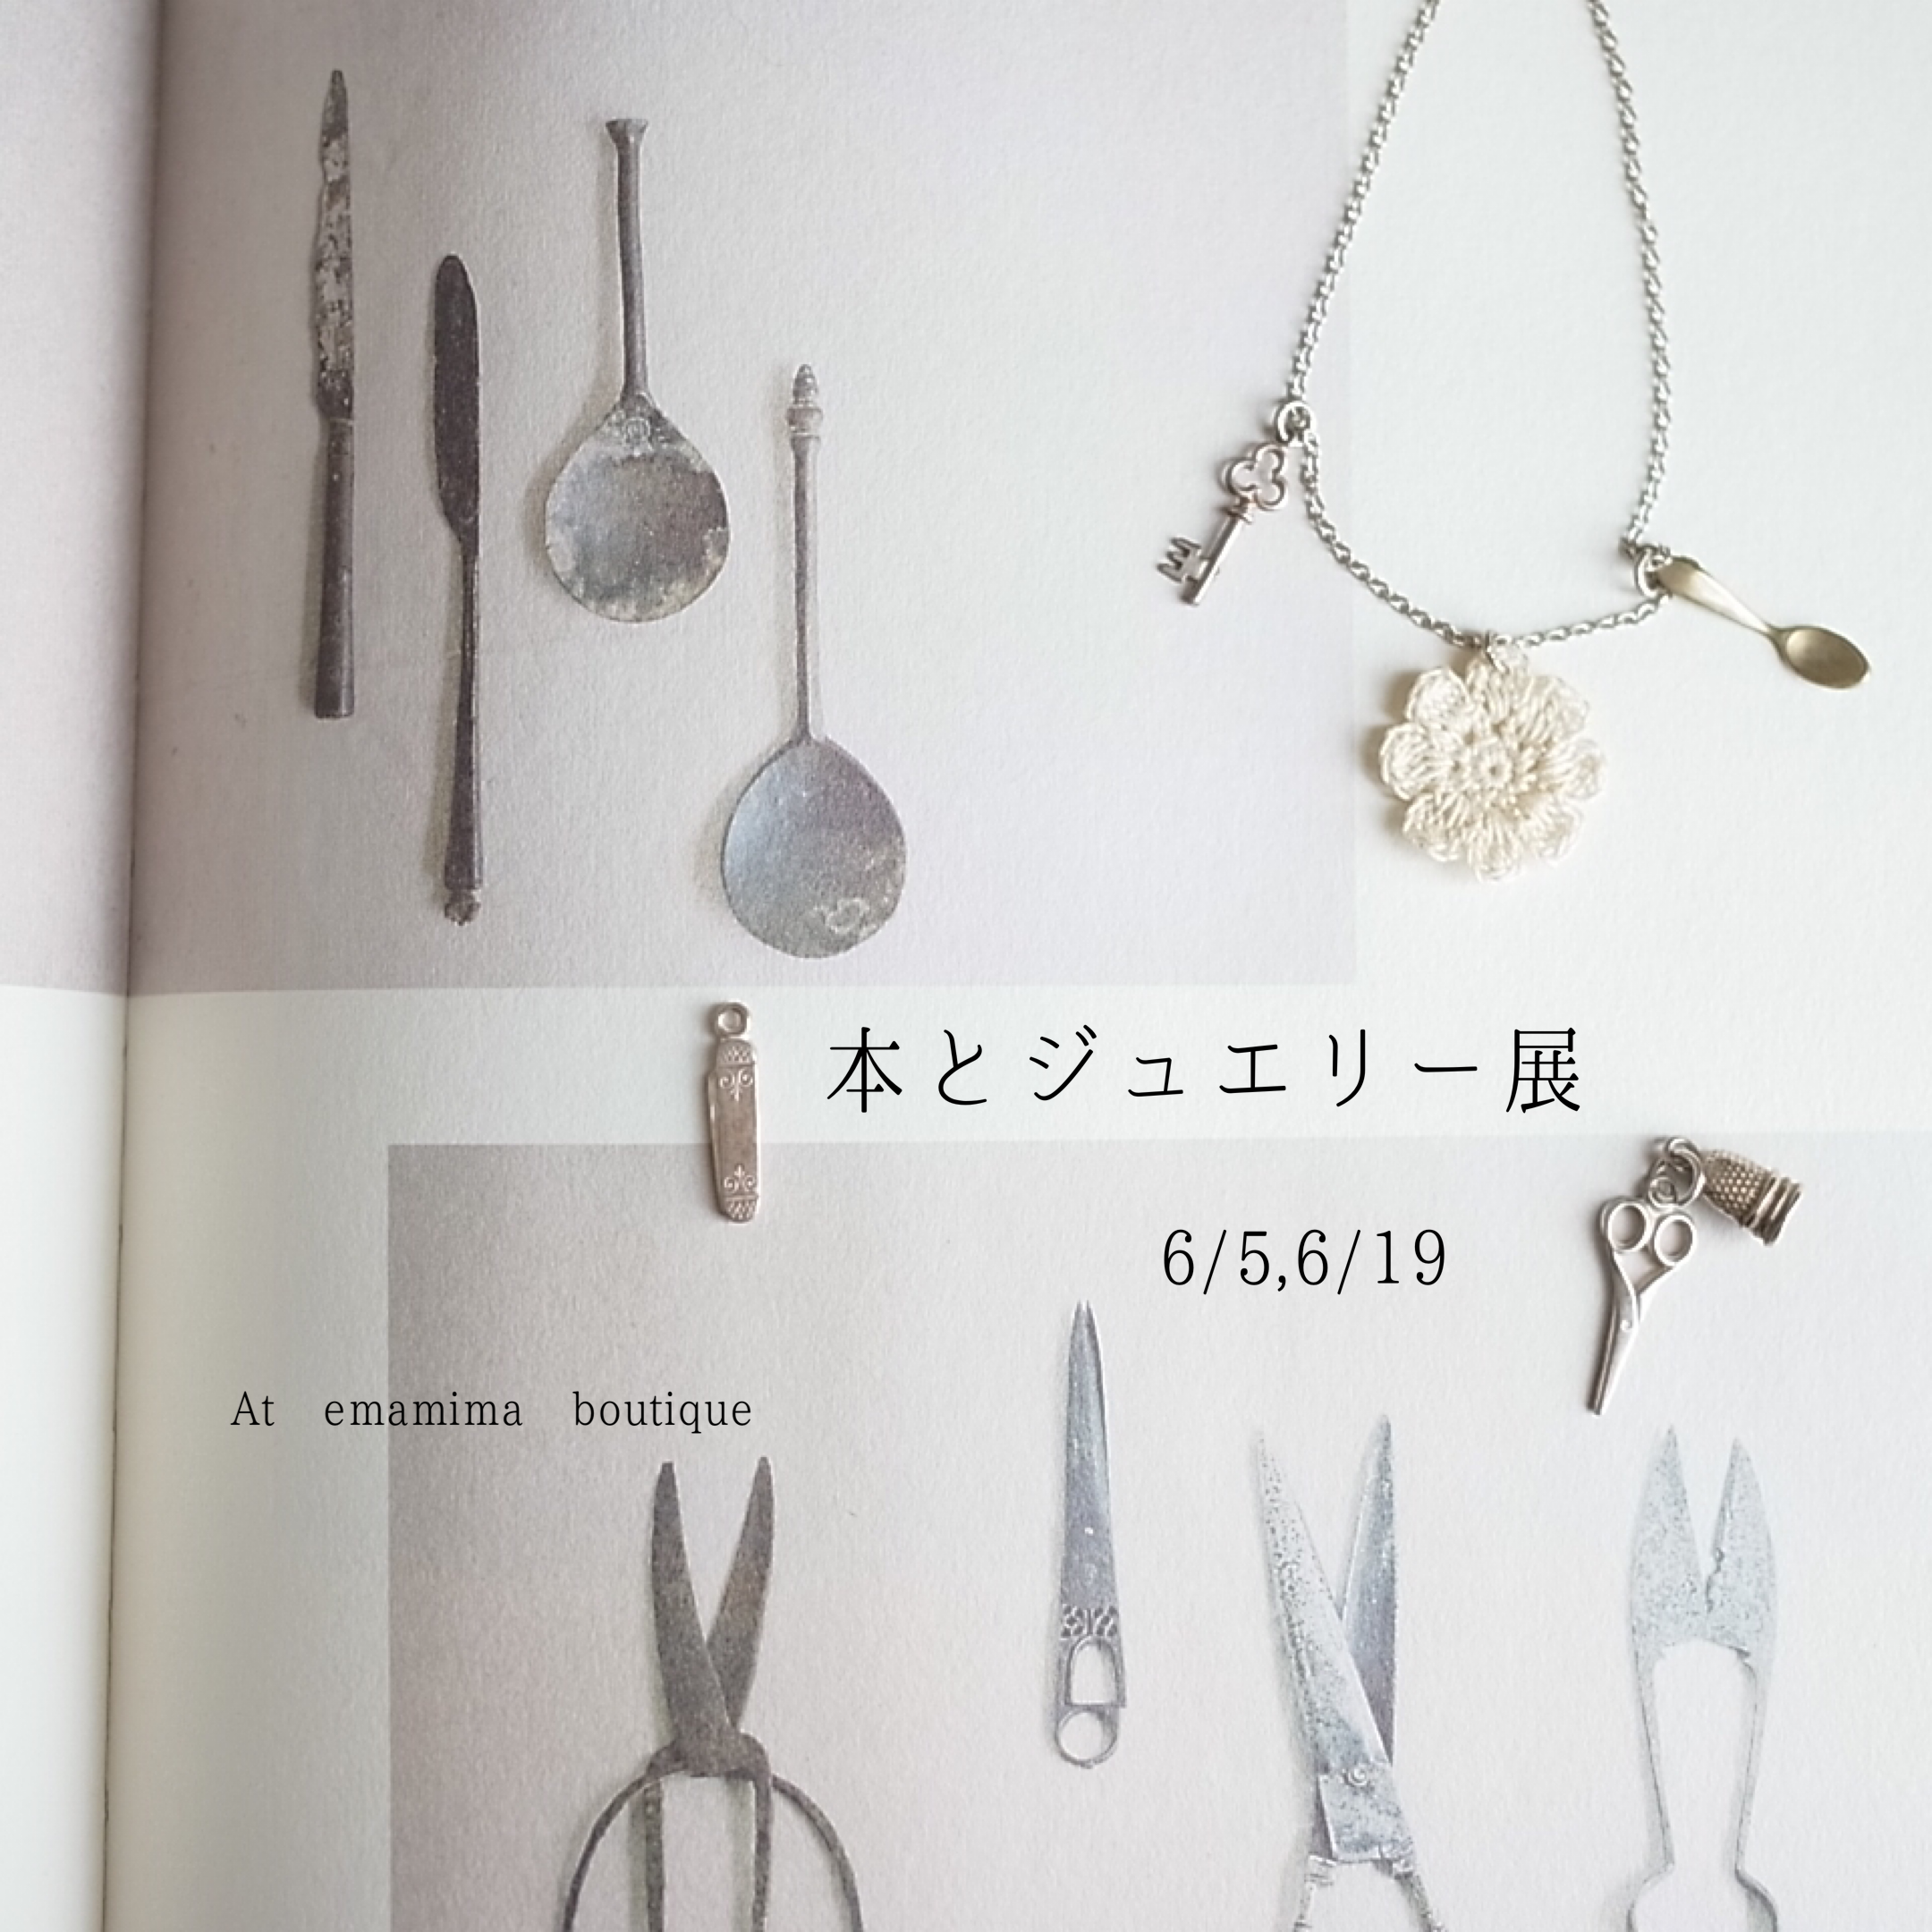 Books and Jewelry exhibition　本とジュエリー展